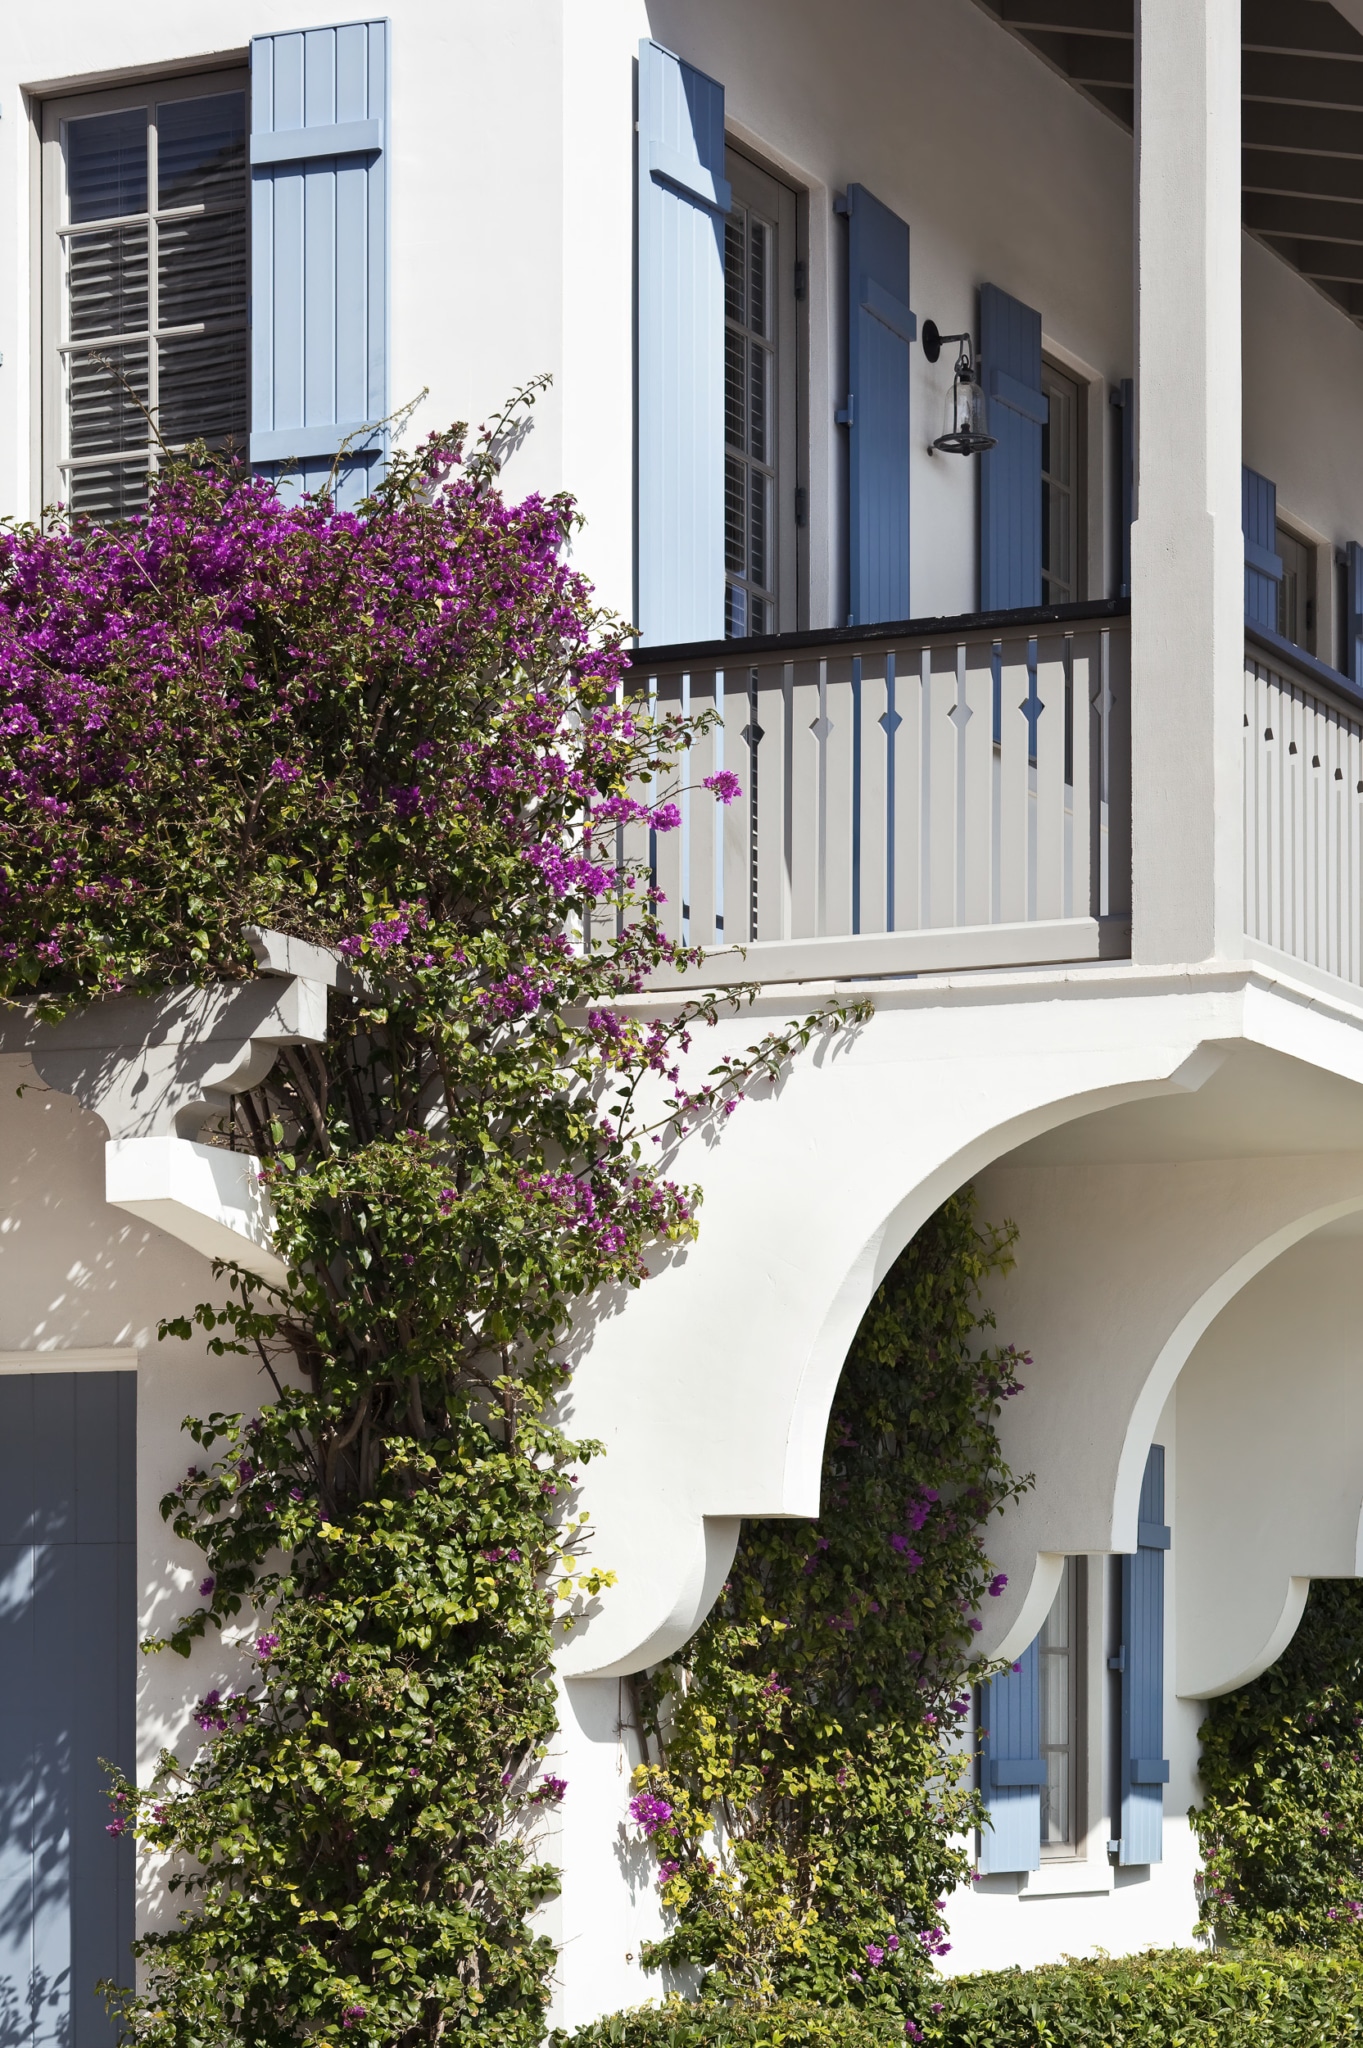 The architecture and design of Windsor a Vero Beach community - beachside - Jessica Glynn Photography - Hadley Keller Author - Vendome press -exterior with climbing bougainvillea